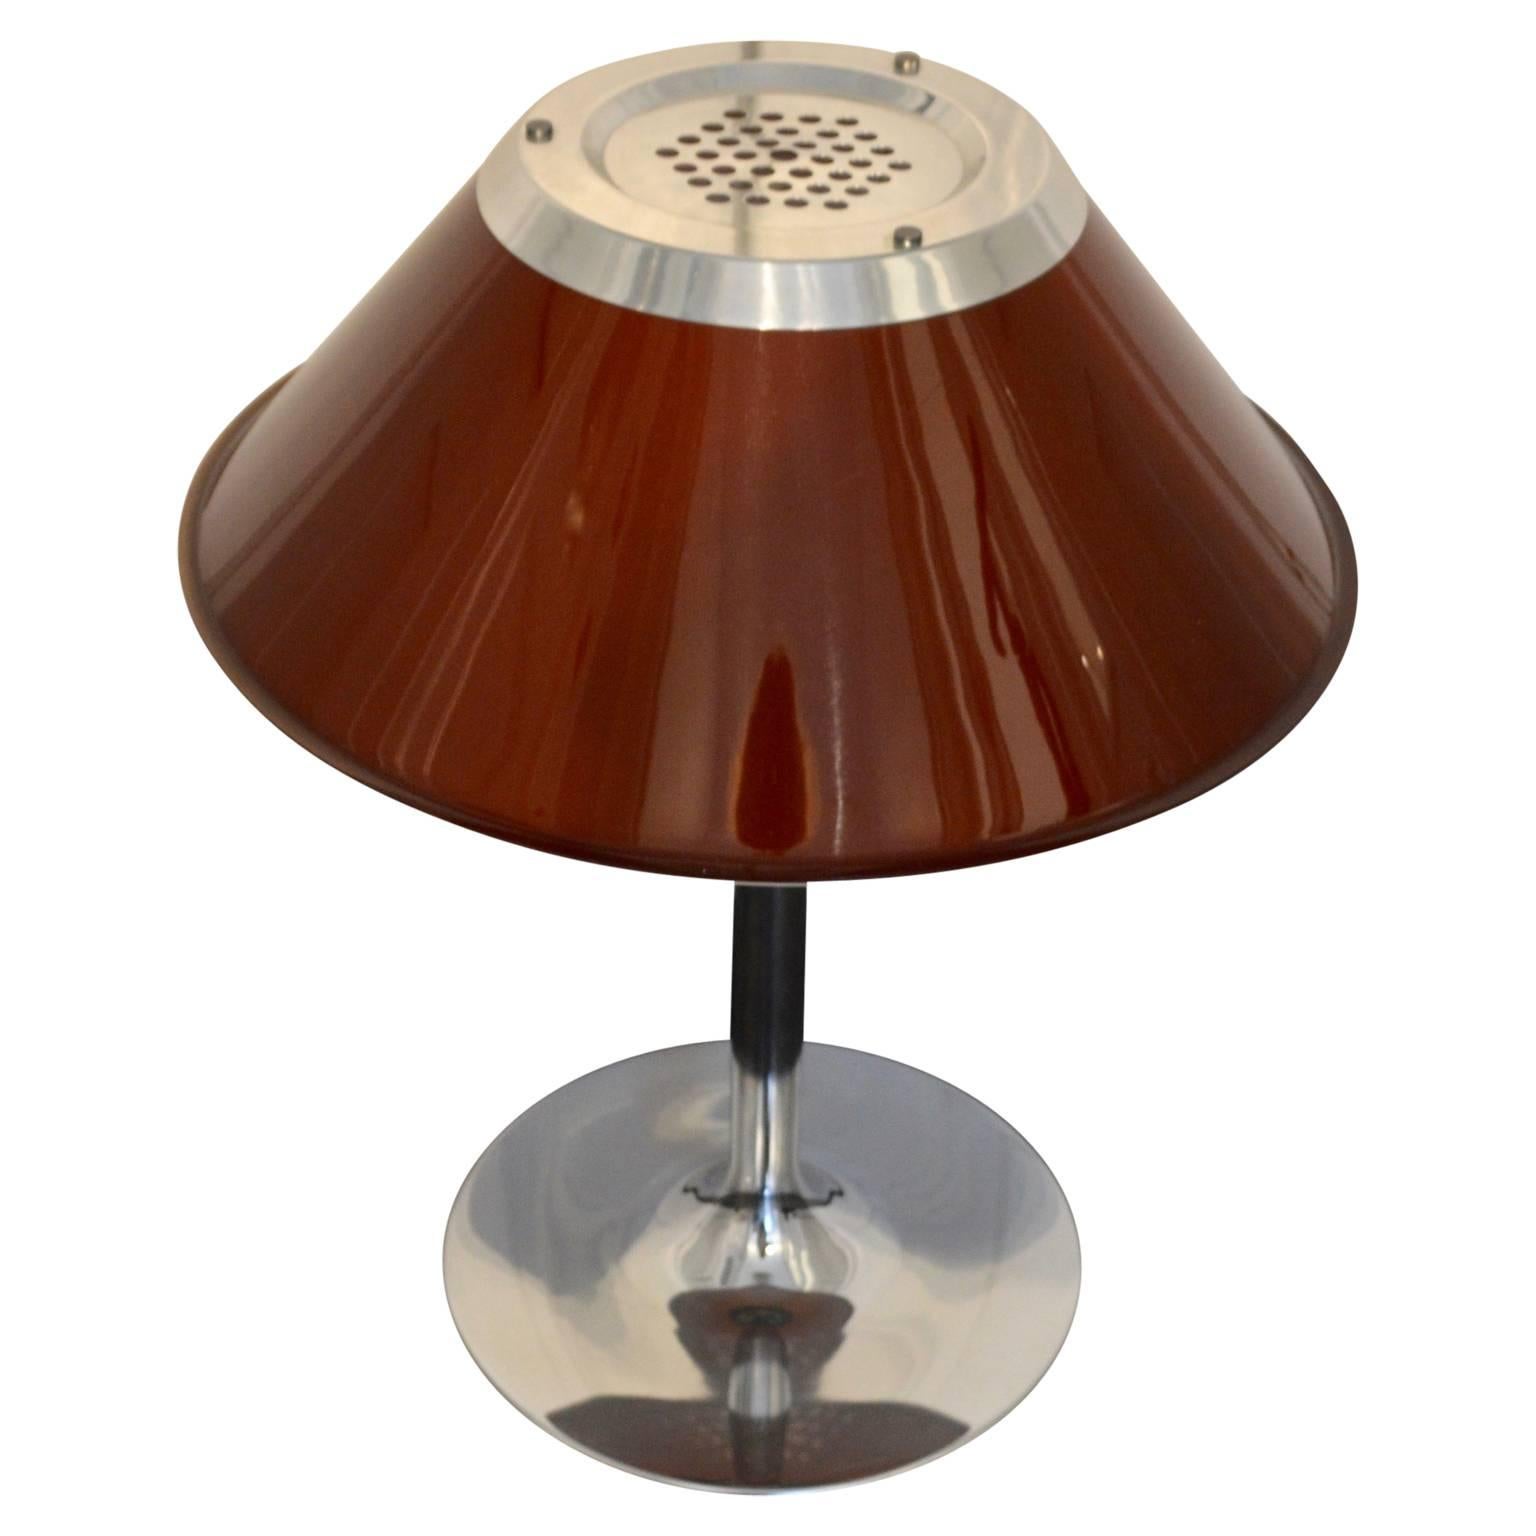 Swedish Midcentury Table Lamp by Per Sundstedt